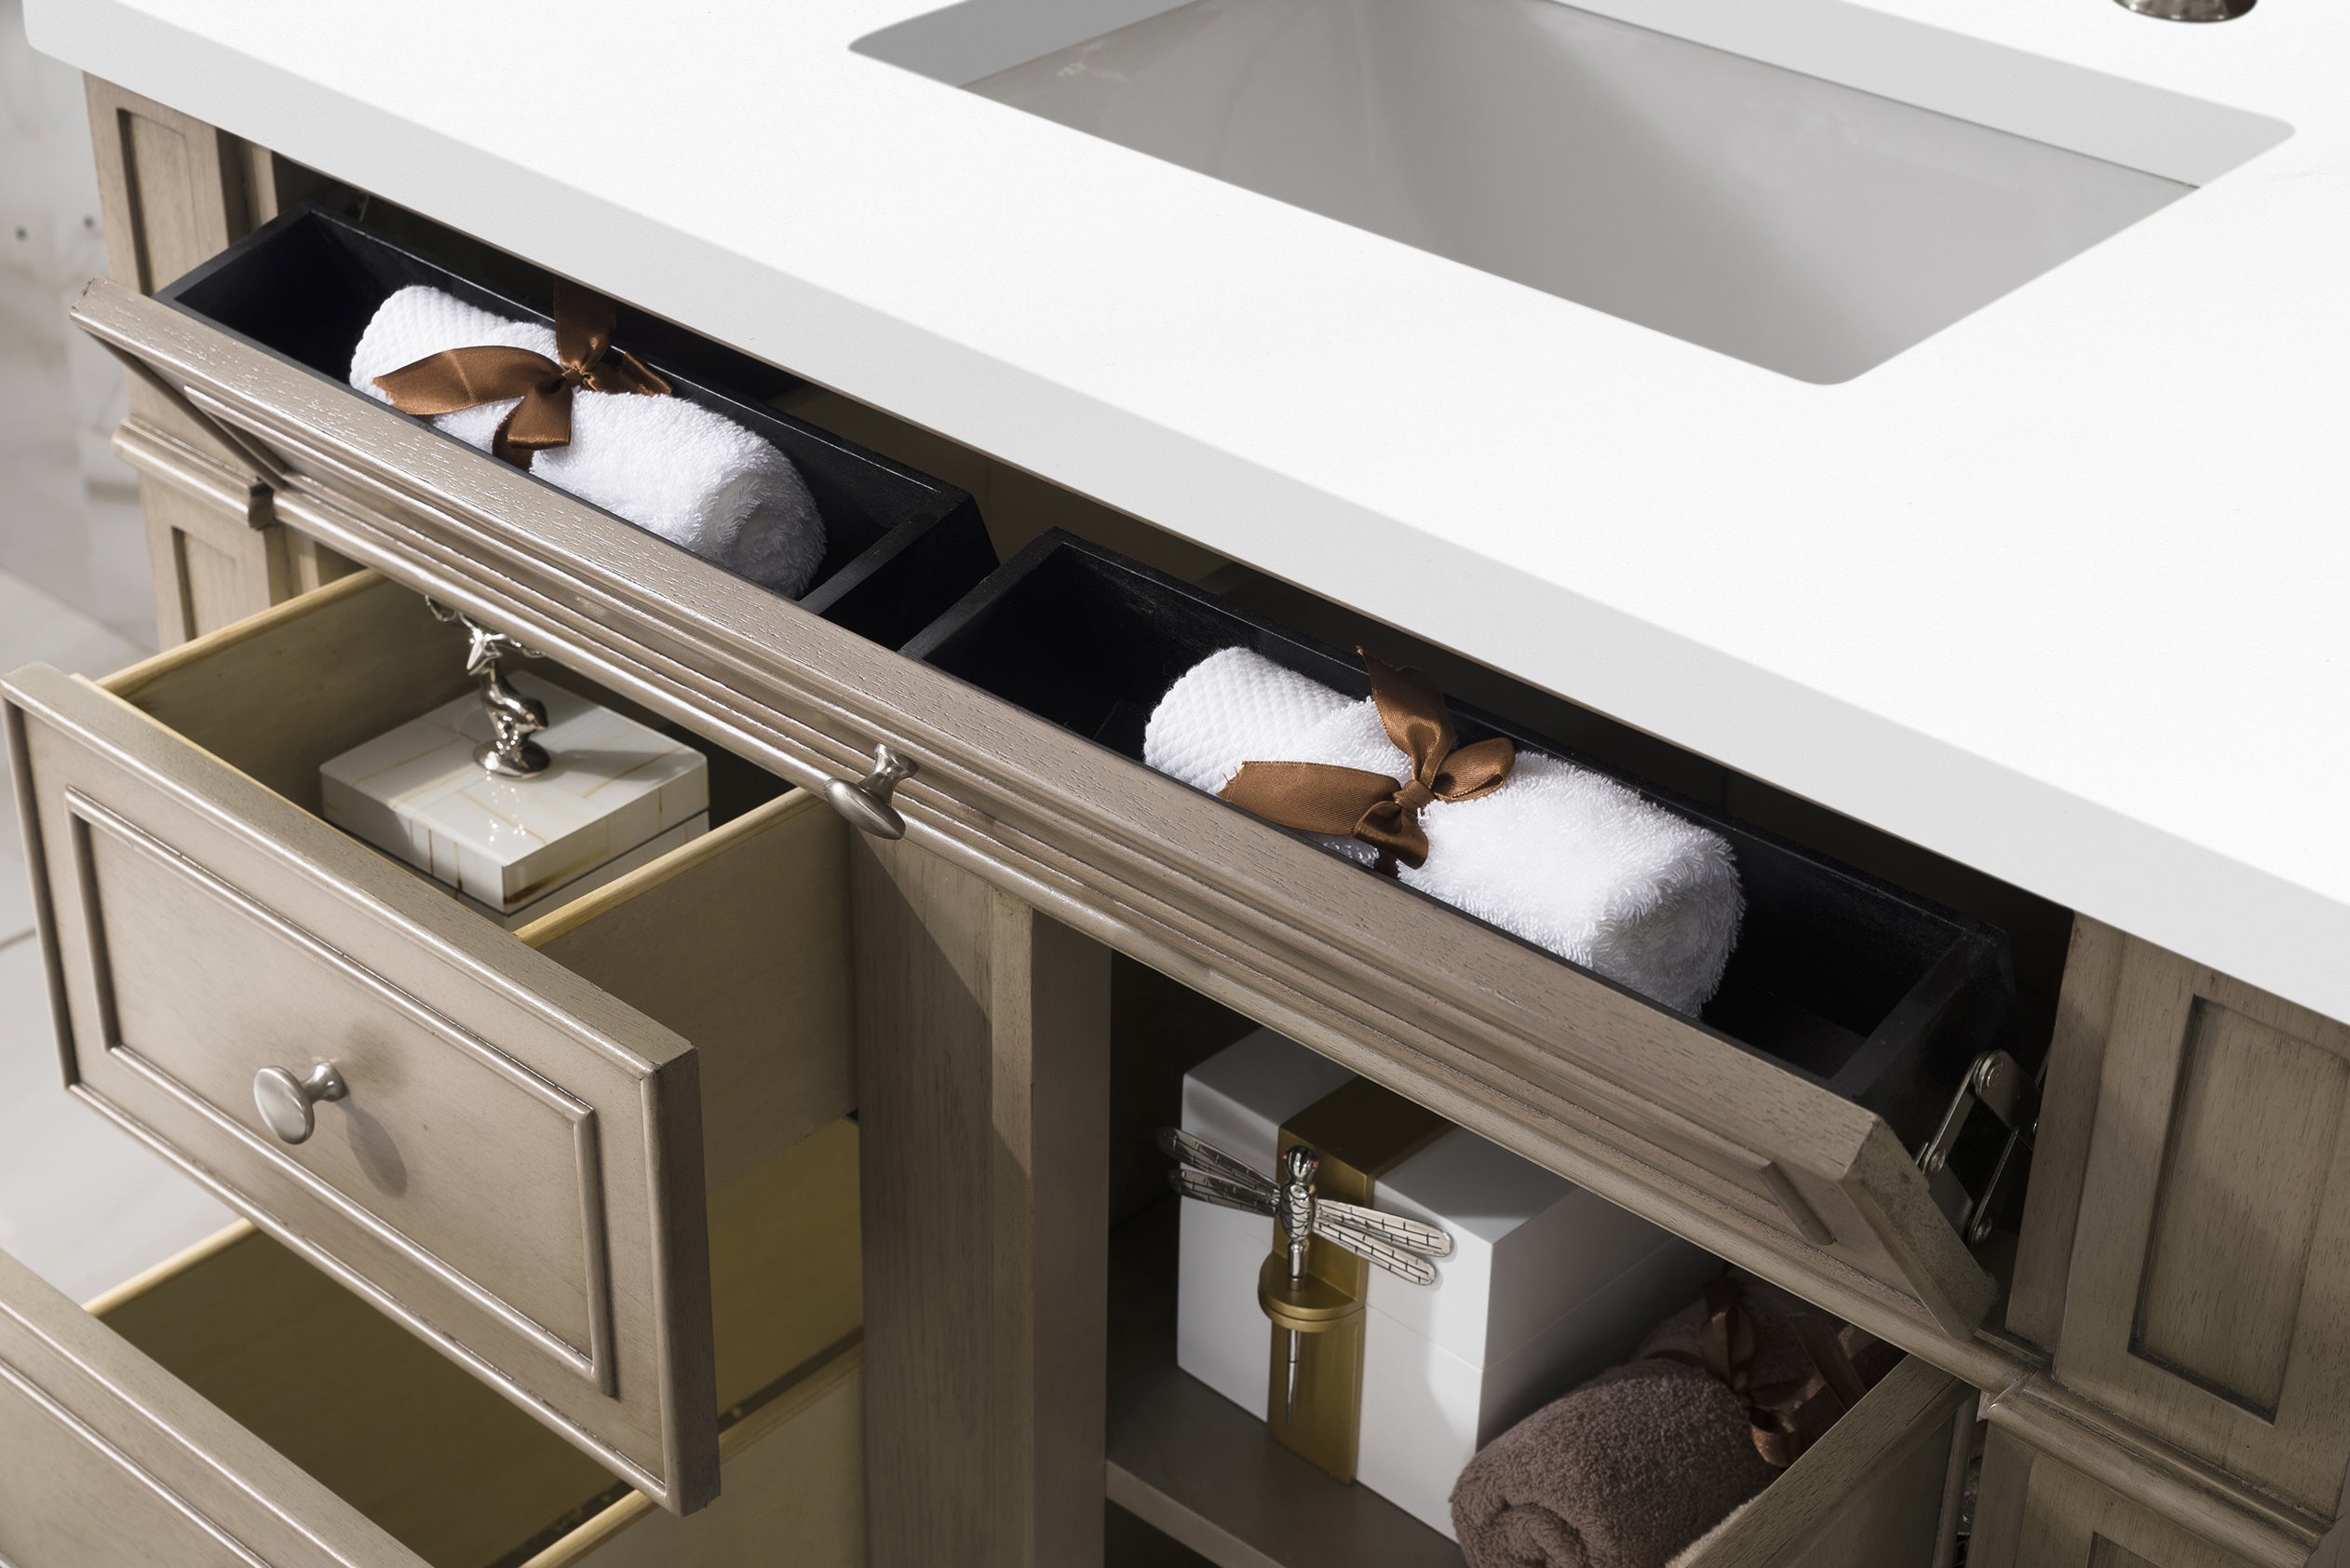 James Martin Vanities Bristol Collection 36 in. Single Vanity in Whitewashed Walnut with Countertop Options